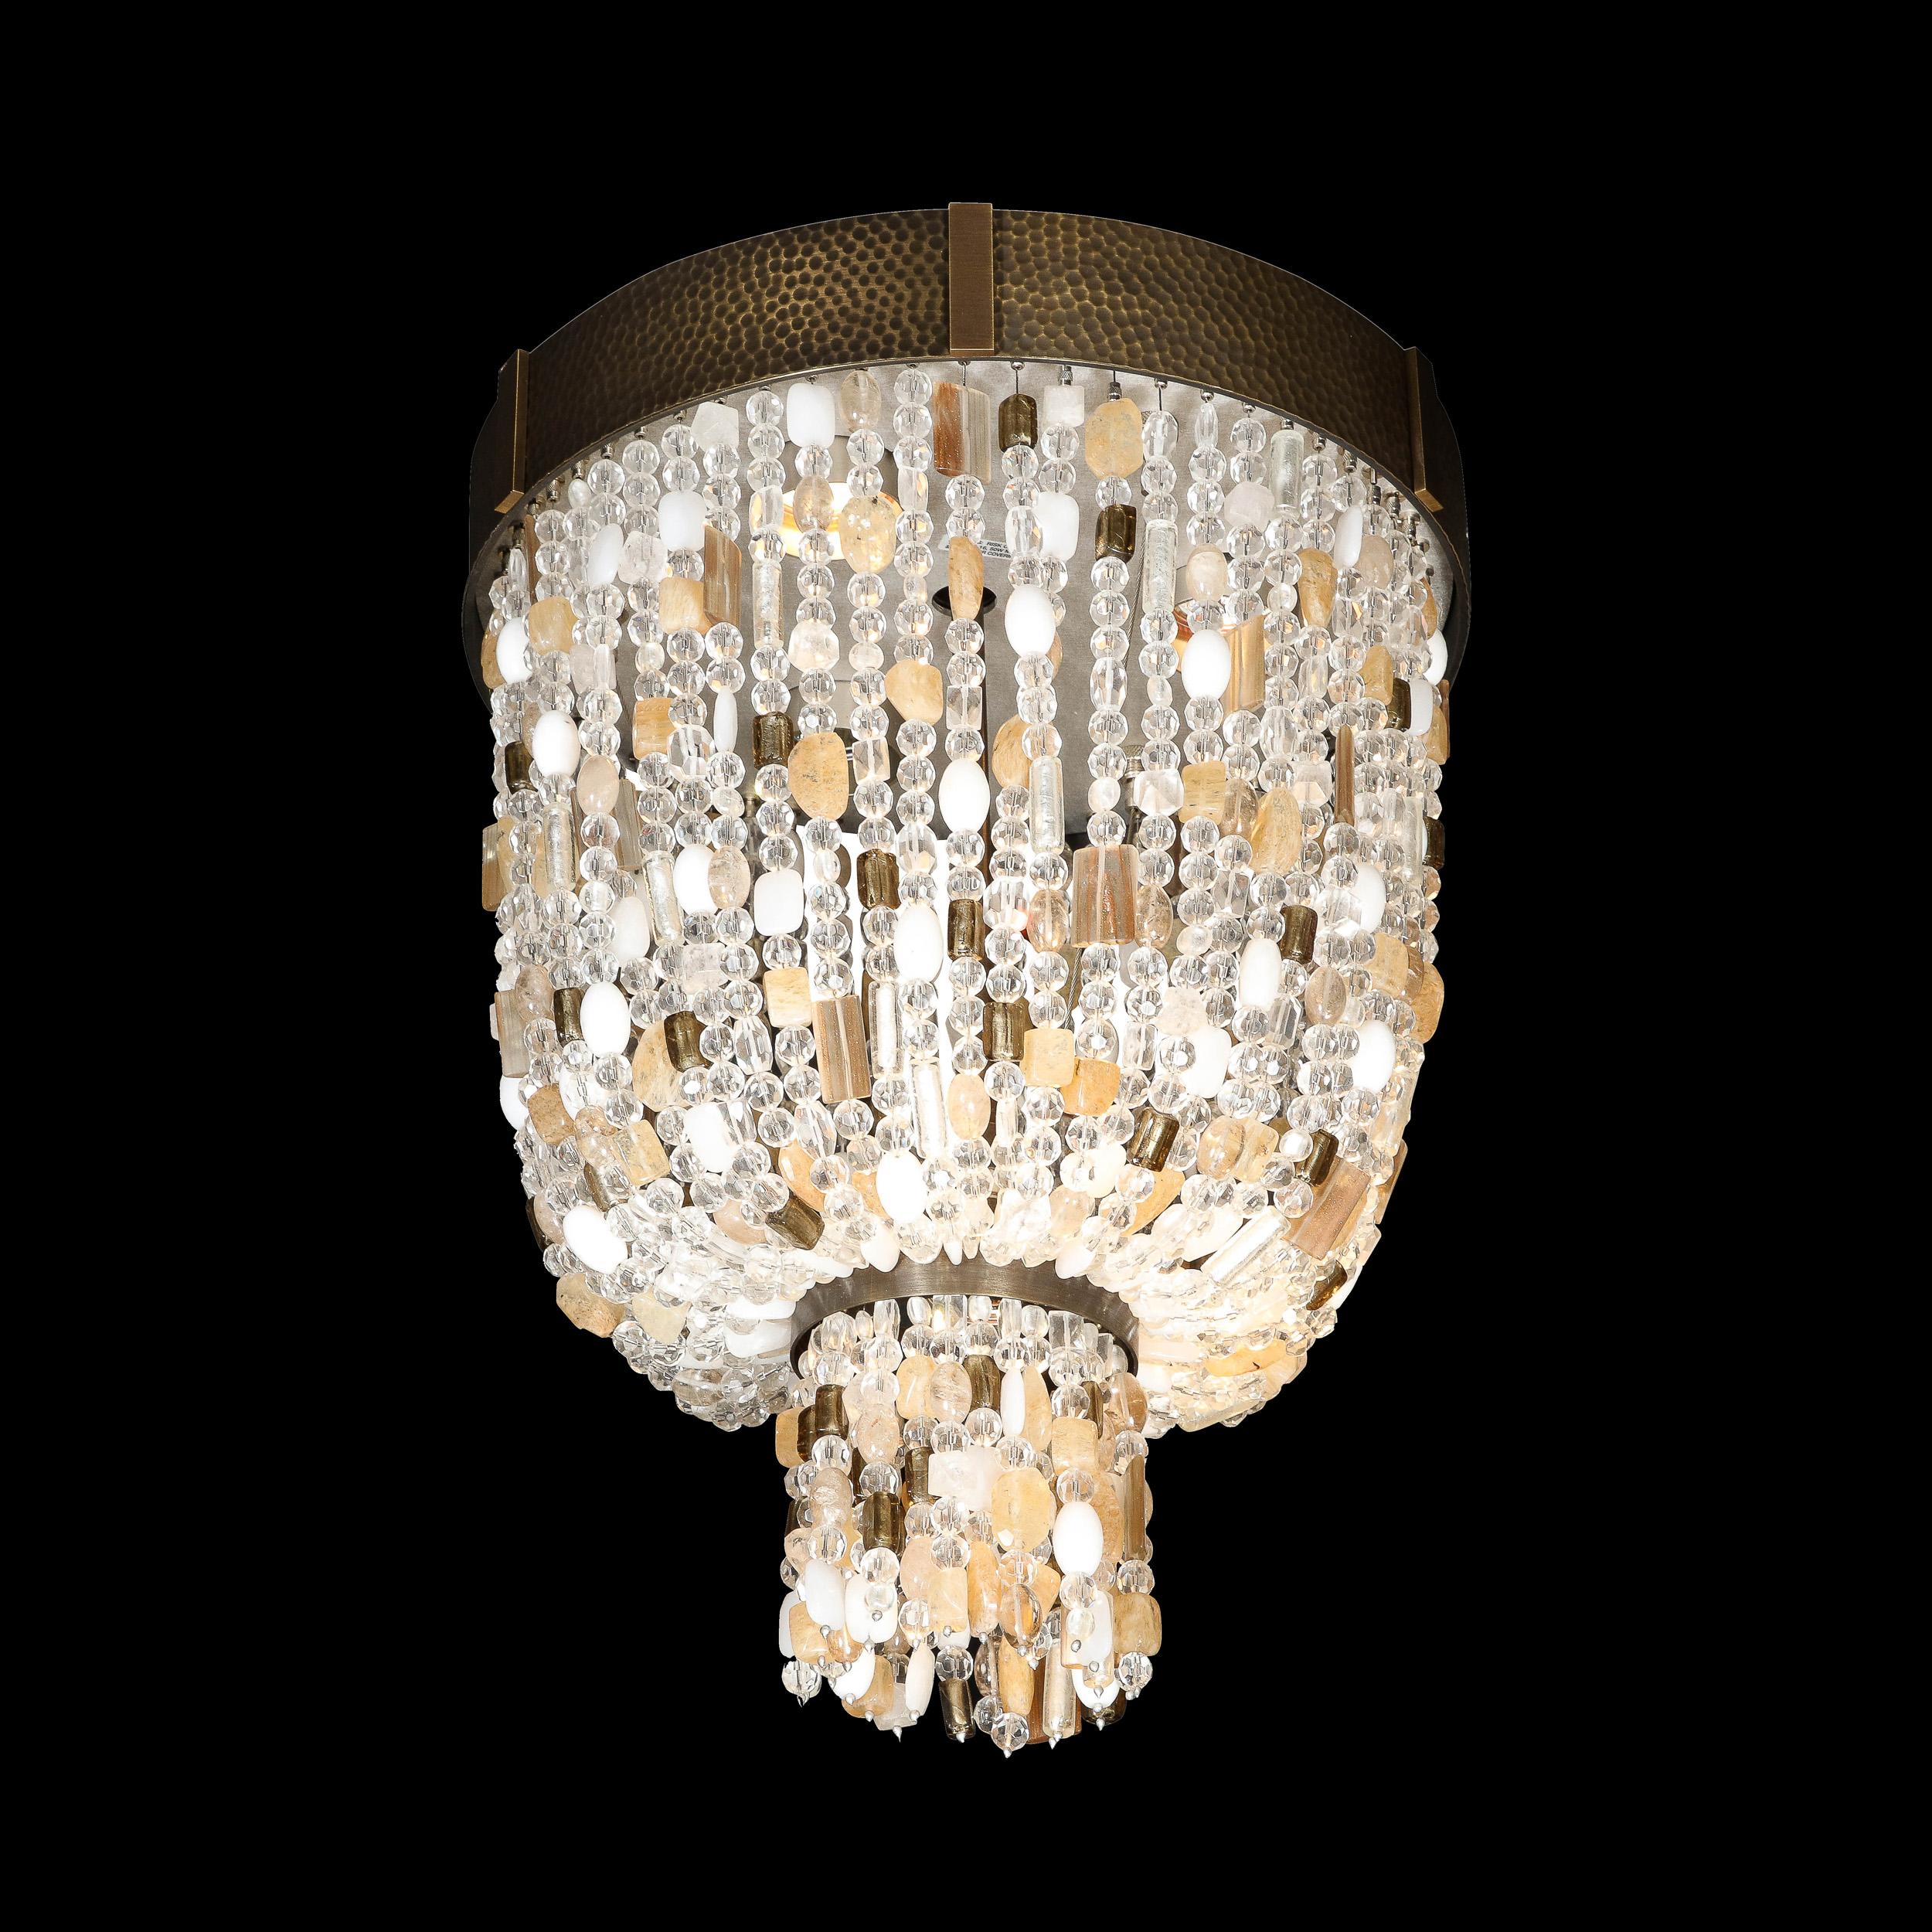 Beaded Murano Glass and Rock Crystal Flush Mount Chandelier w/ Oil Rubbed Bronze In Excellent Condition For Sale In New York, NY